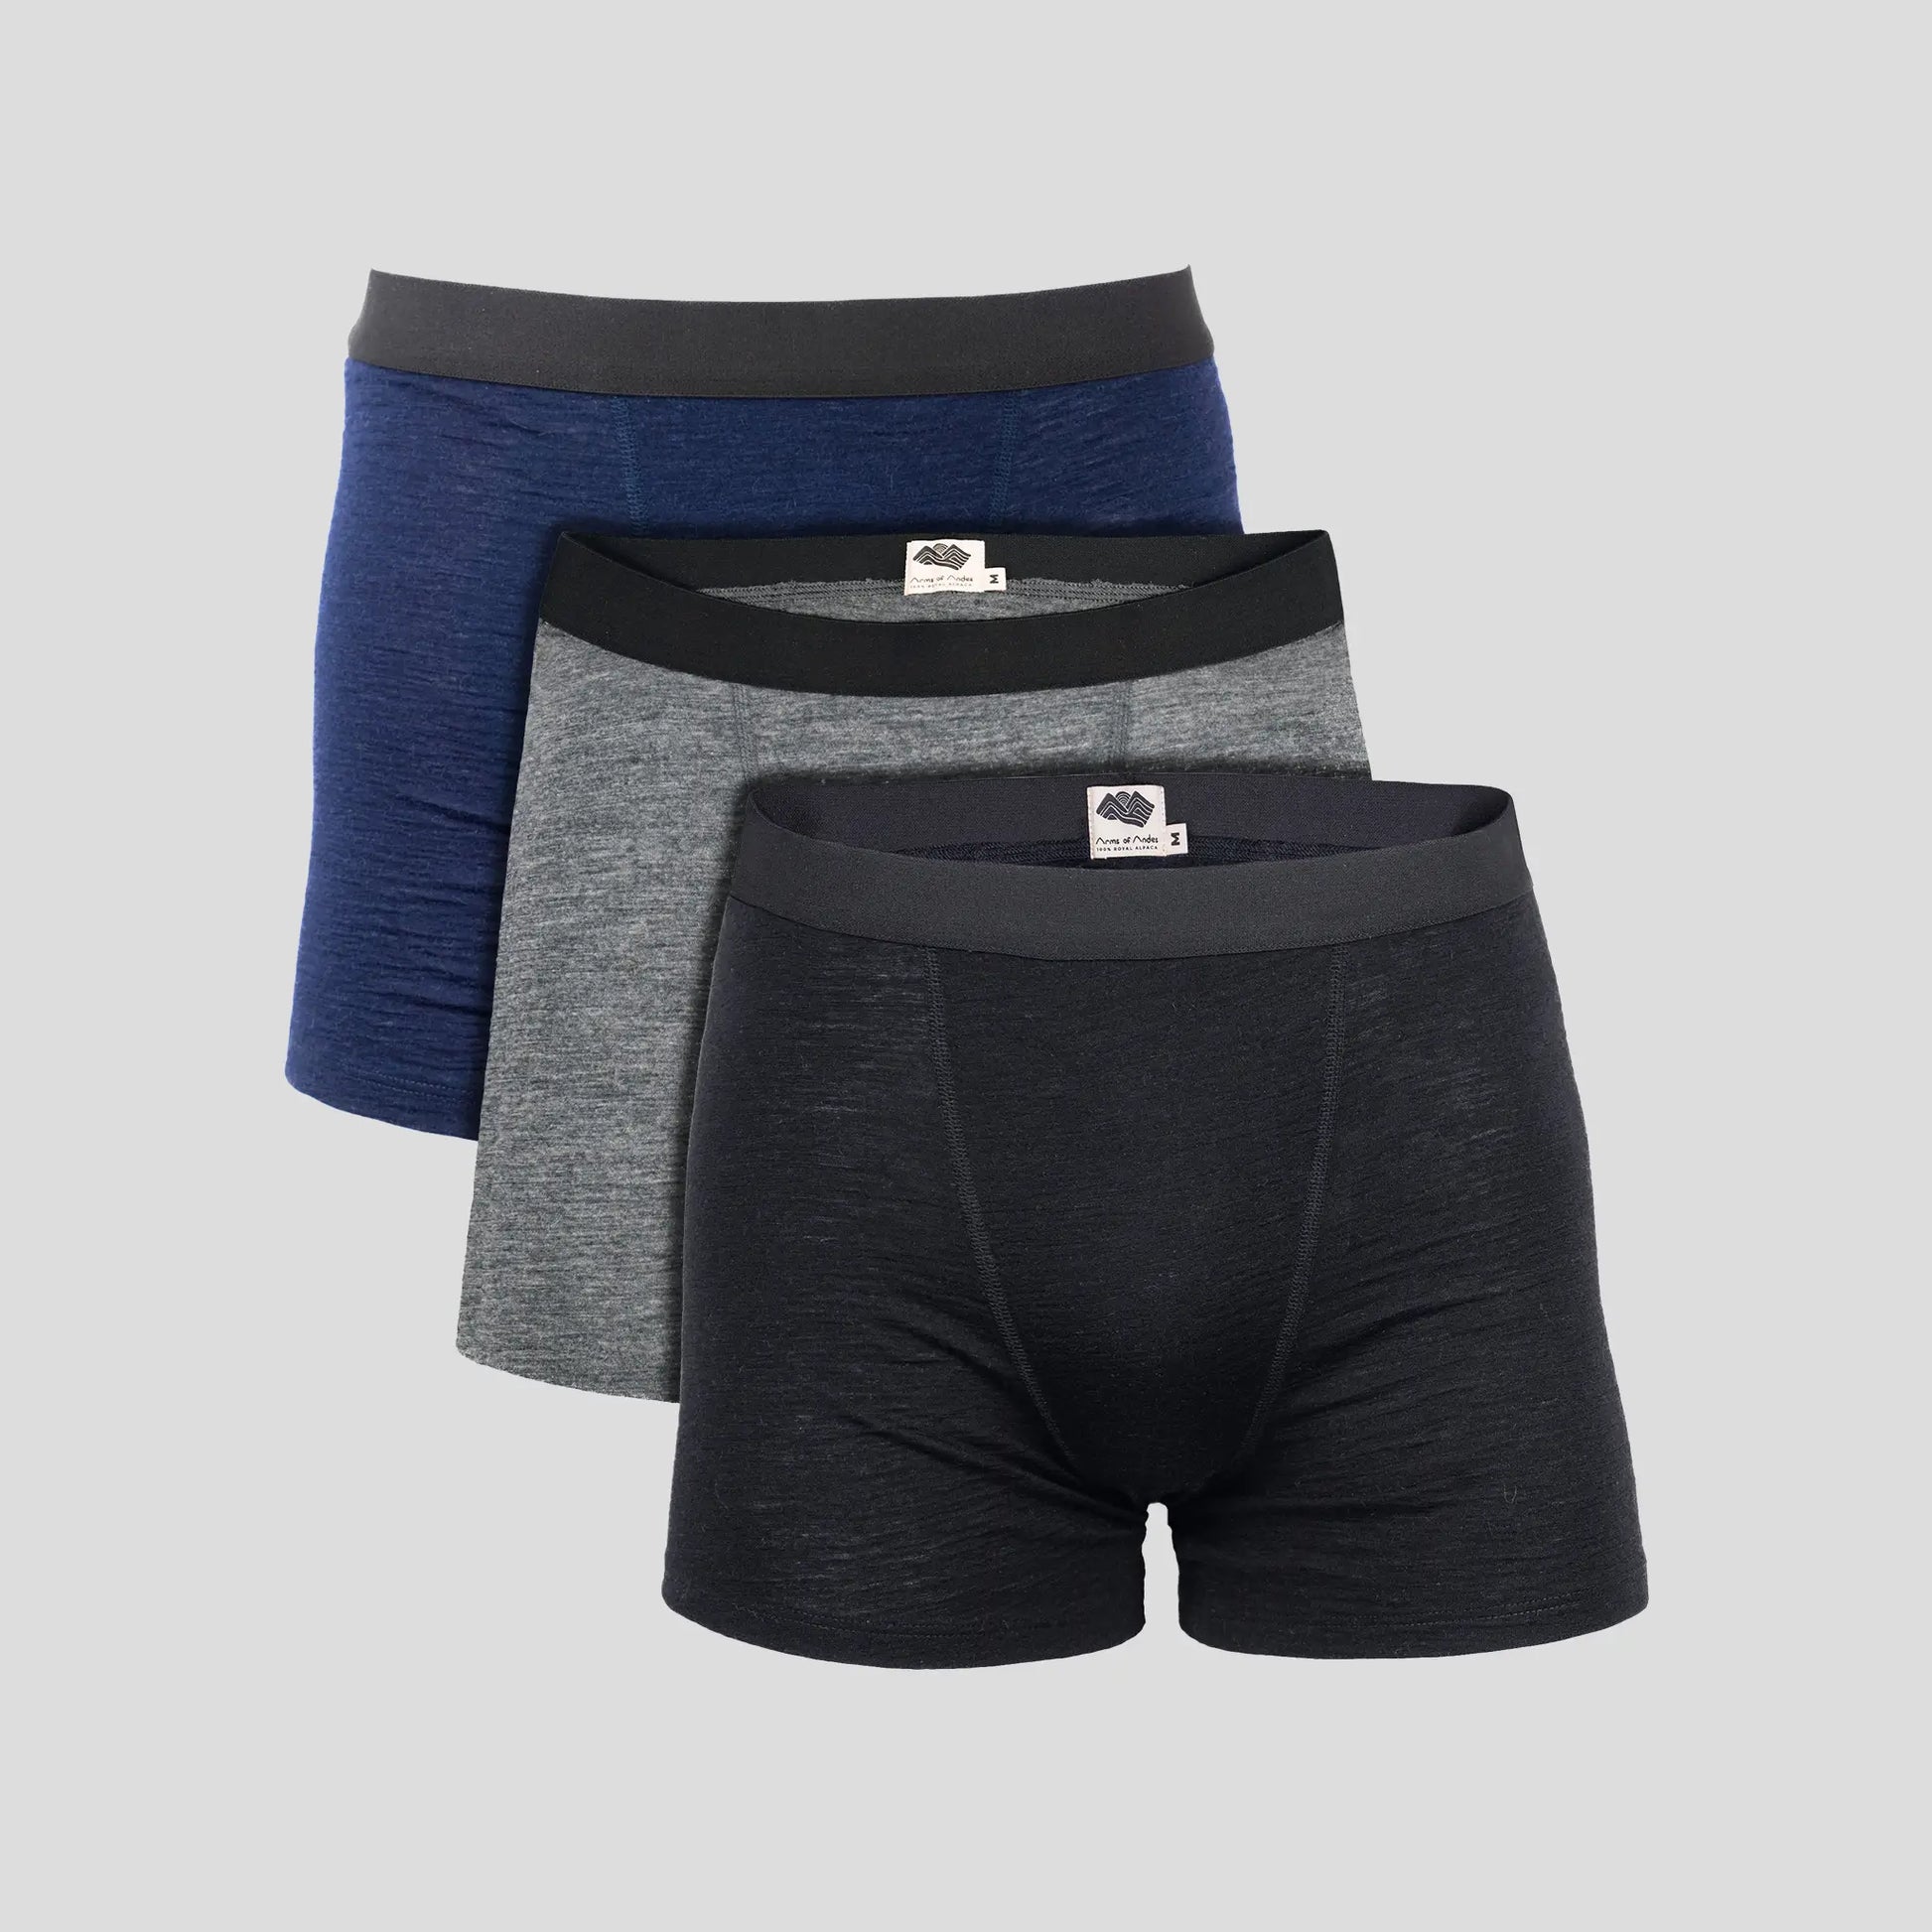 Buy Blue 4 pack Woven Pure Cotton Boxers from Next Germany